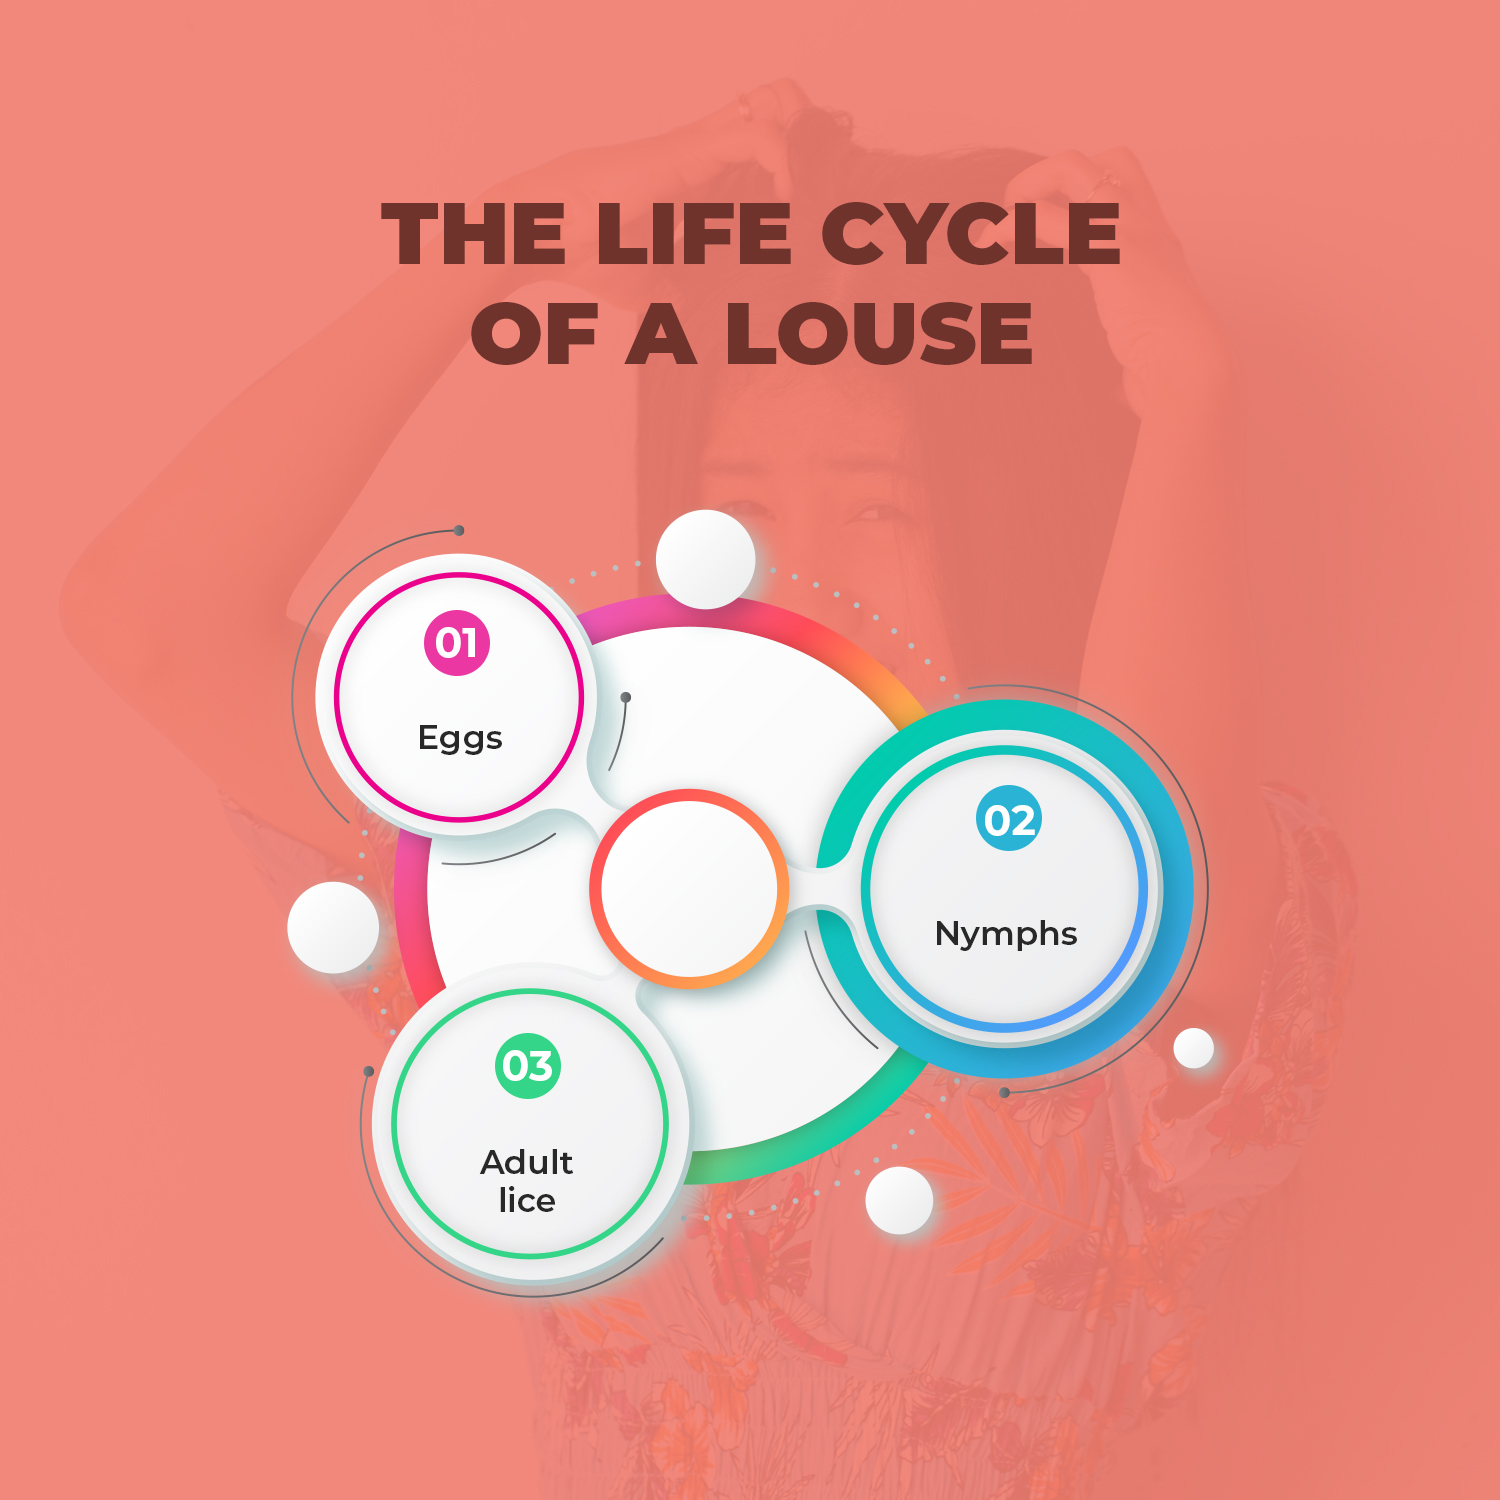 The Life Cycle of a Louse